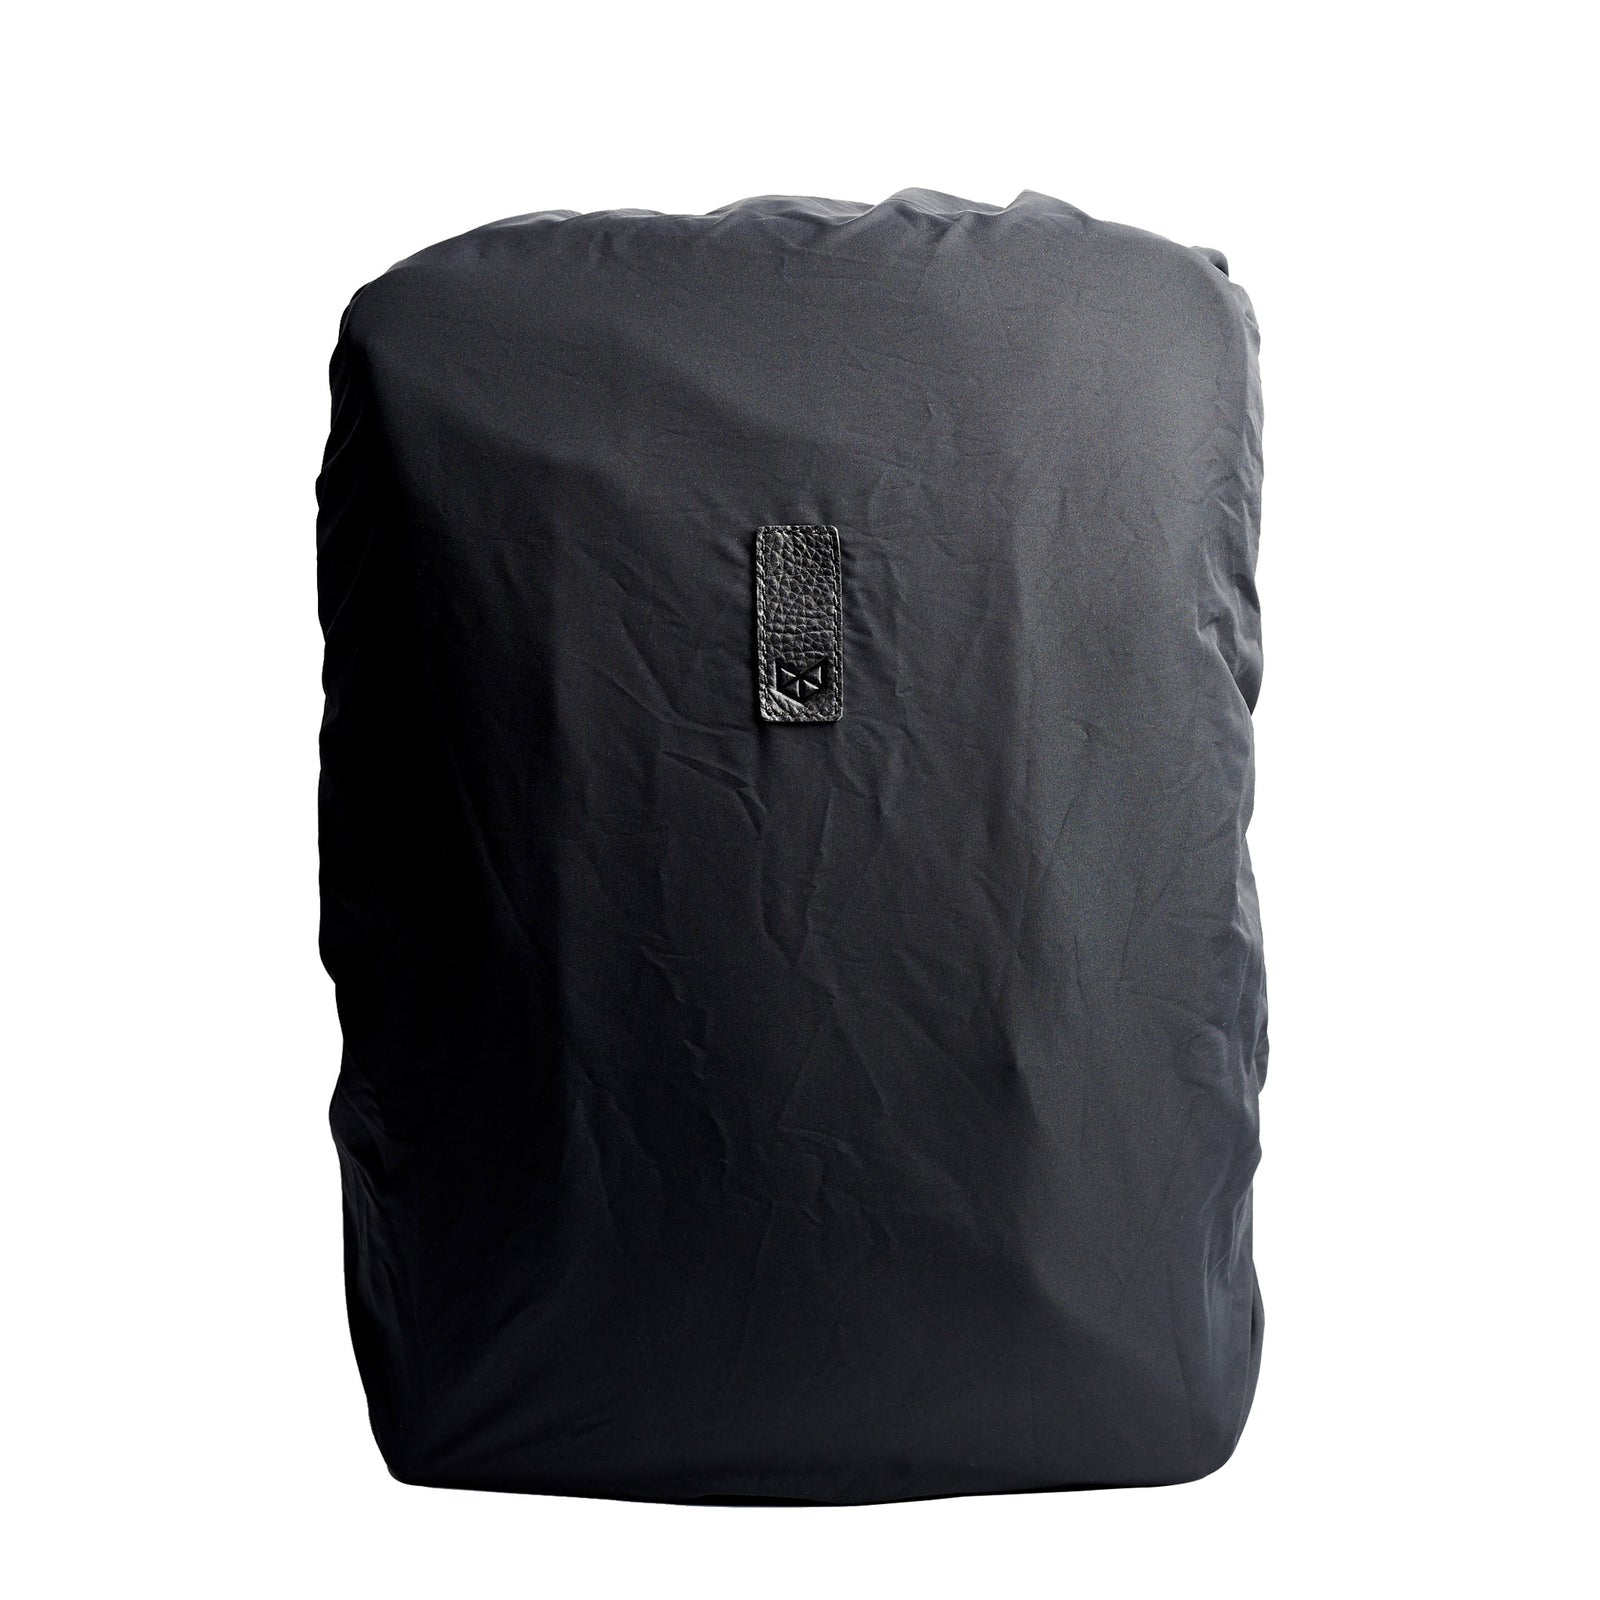 Black rain cover for leather backpacks. Mens backpacks accessories